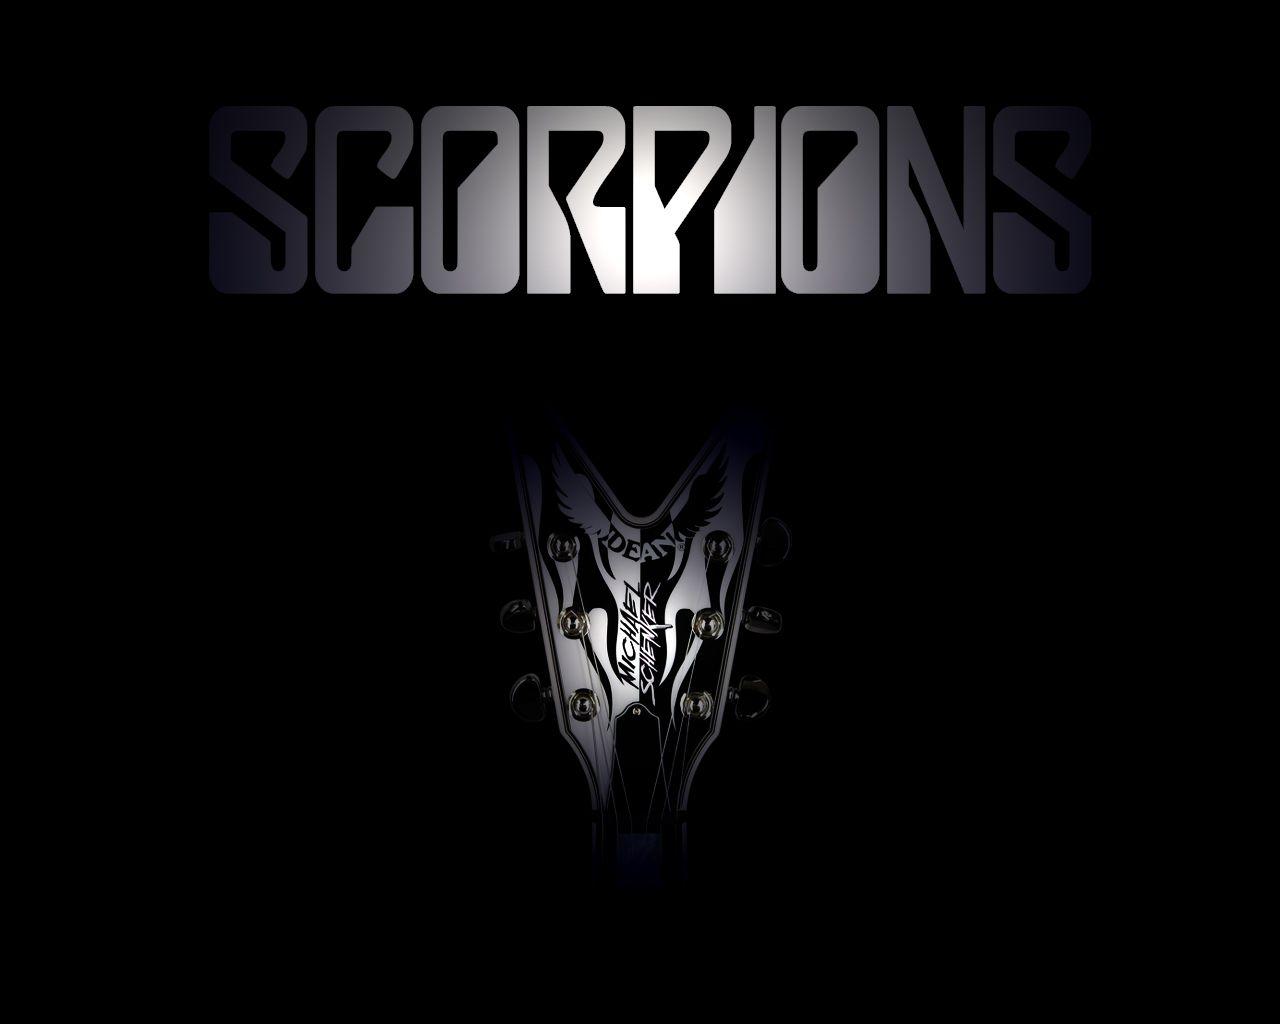 Scorpions. Bands, Artists, Singers. Scorpion and Bob